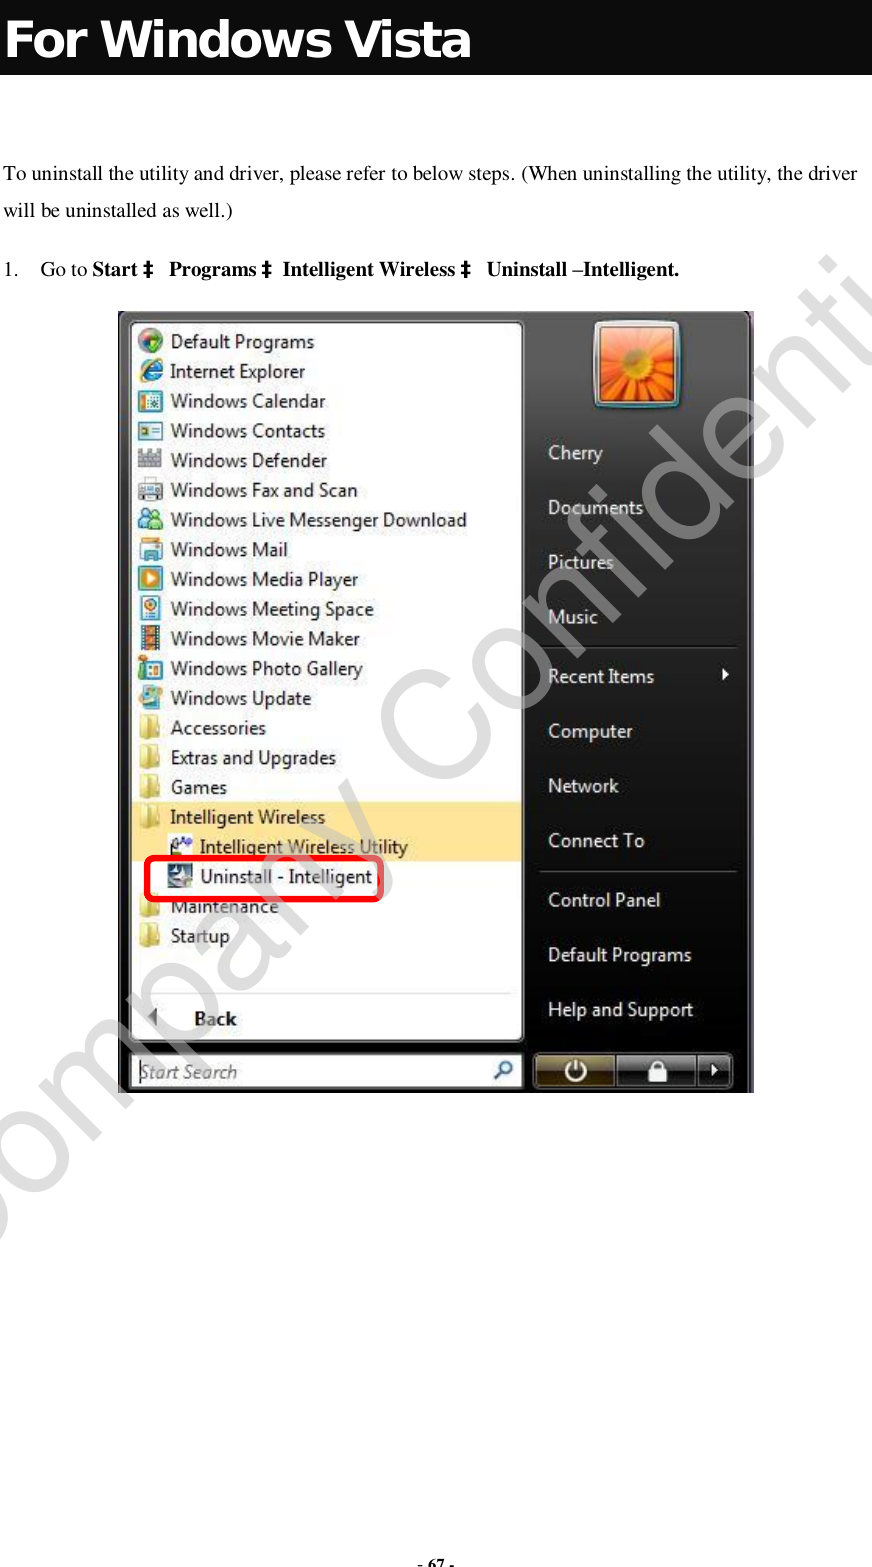  - 67 - For Windows Vista  To uninstall the utility and driver, please refer to below steps. (When uninstalling the utility, the driver will be uninstalled as well.) 1. Go to Start à Programs àIntelligent Wireless à Uninstall –Intelligent.         Company Confidential